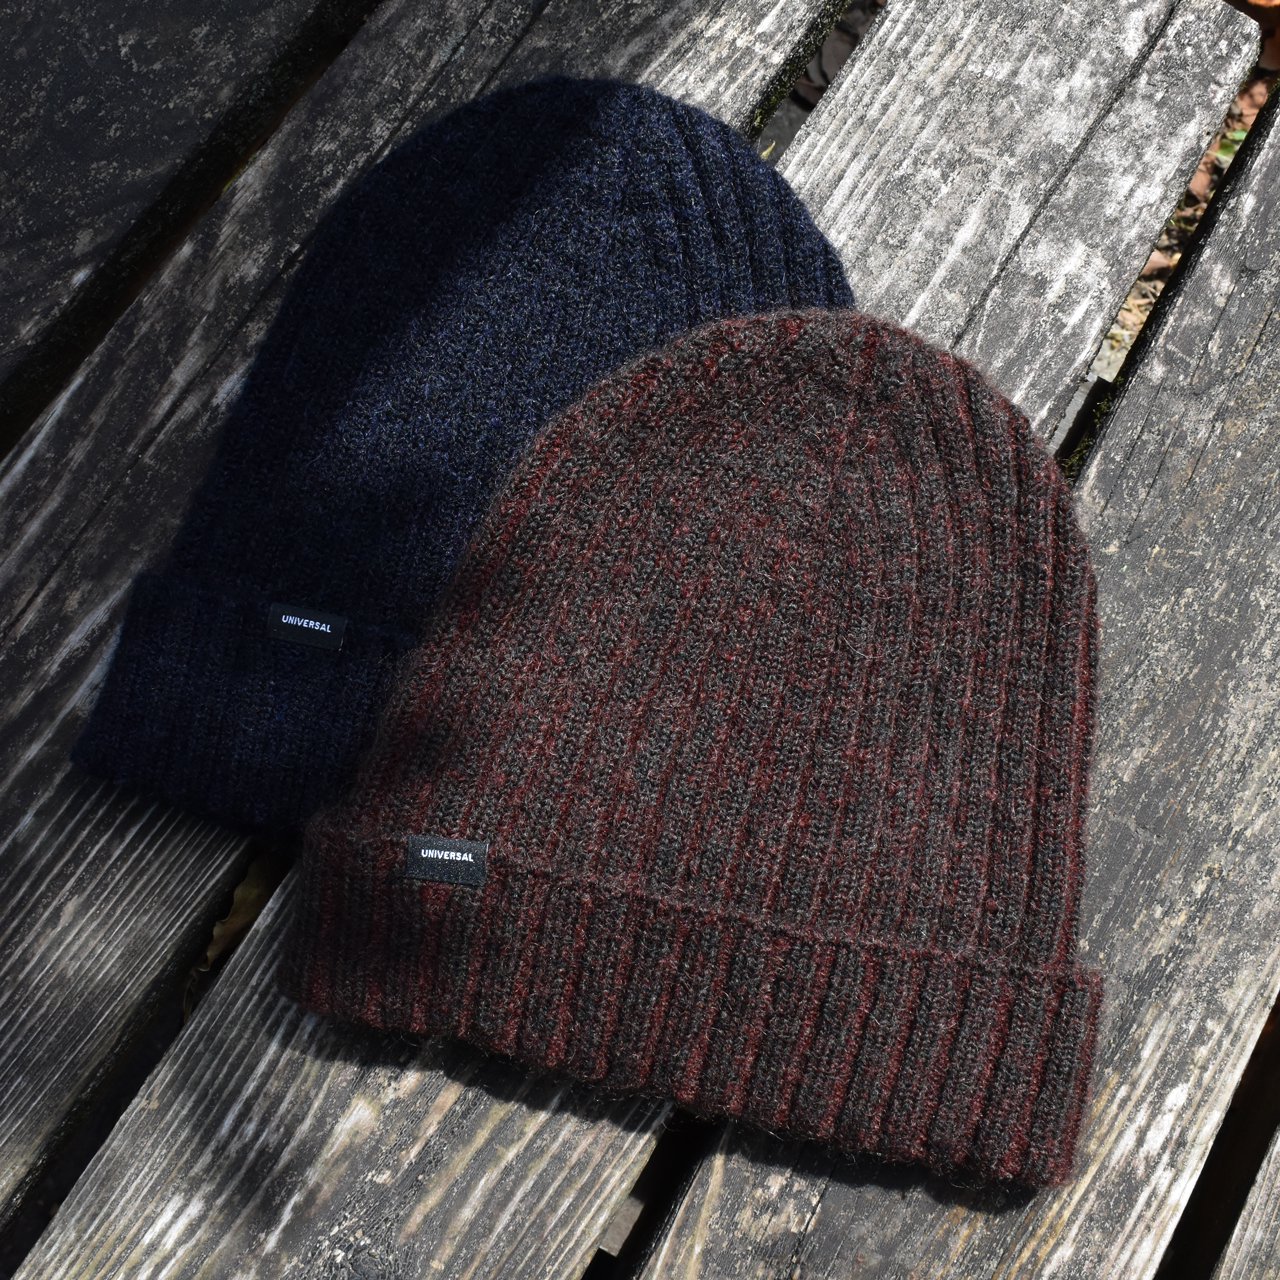 UNIVERSAL PRODUCTS ユニバーサルプロダクツ WOOL MOHAIR KNIT BEANIE